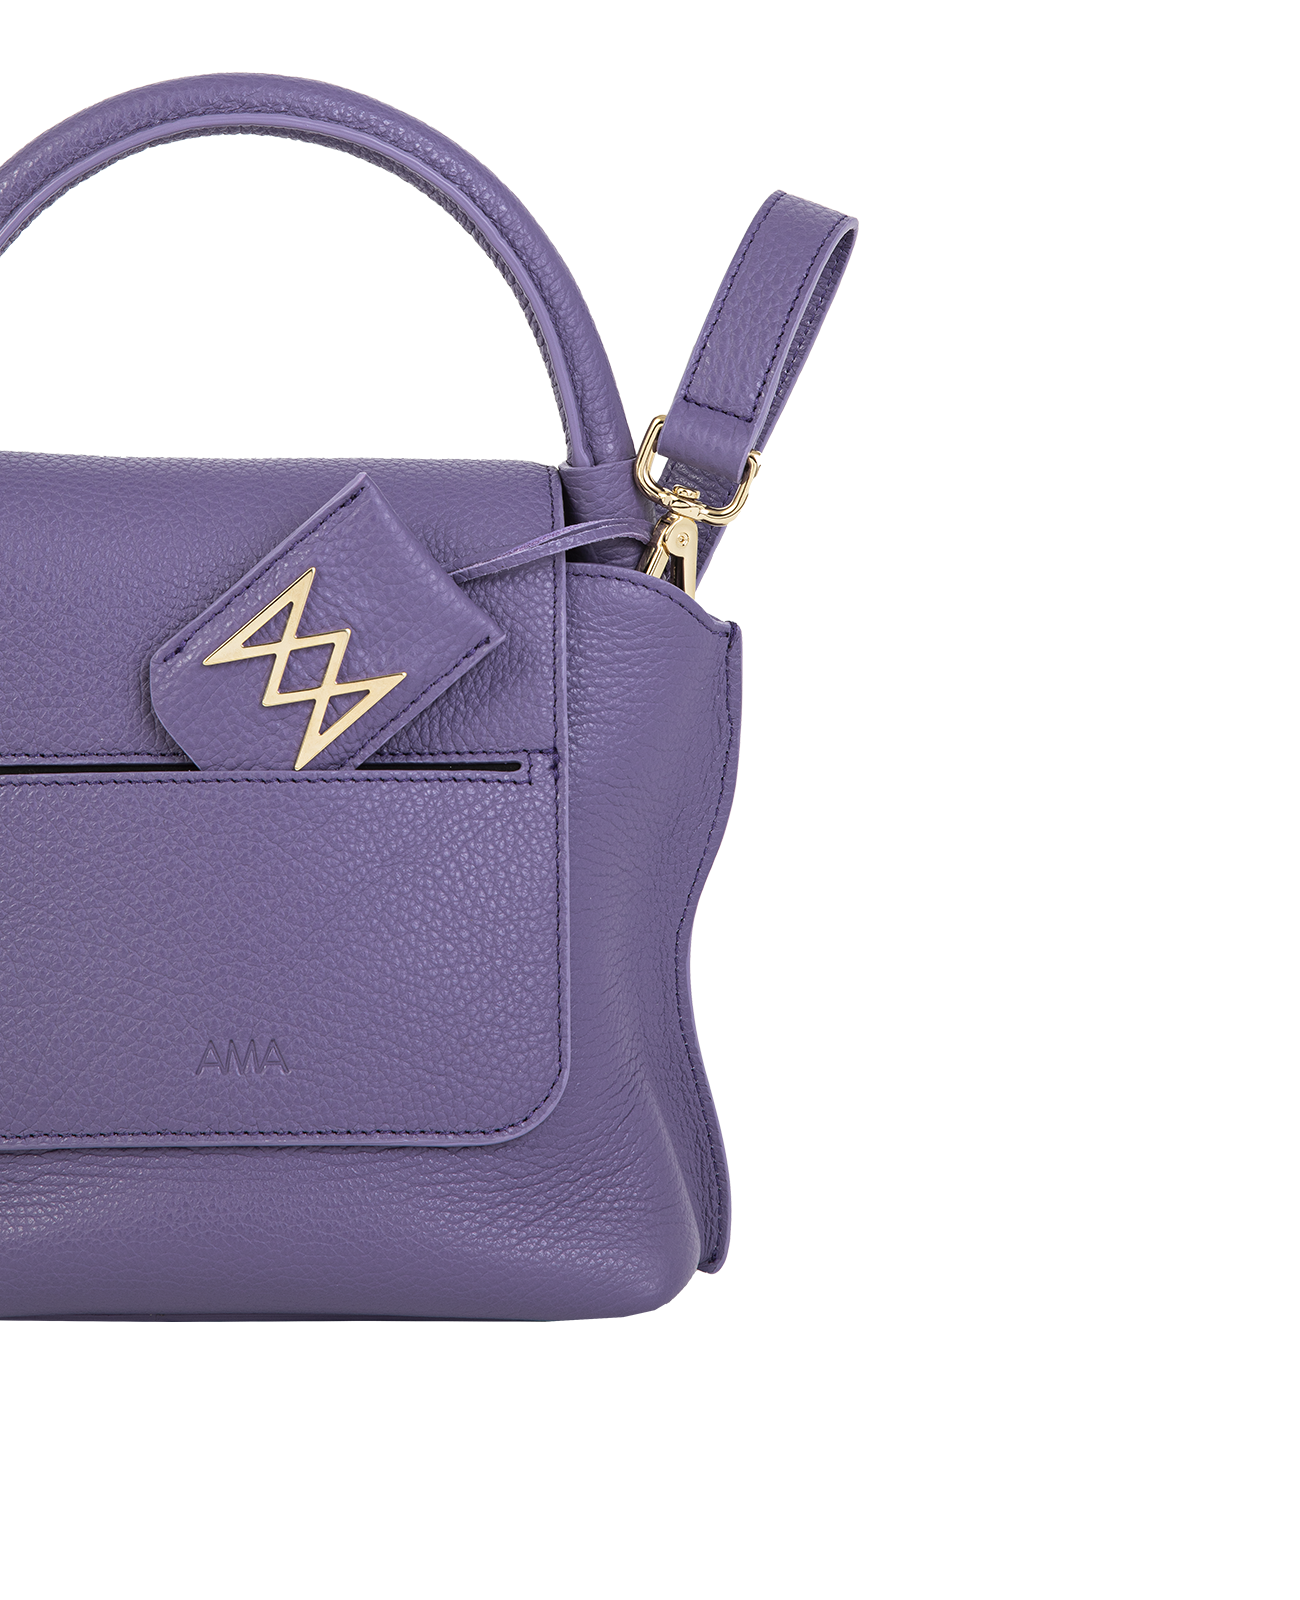 Cross-body bag in Italian full-grain leather, semi-aniline calf Italian leather with detachable shoulder strap.Three compartments, zip pocket in the back compartment. Magnetic flap closure with logo. Color: Purple. Size:Medium